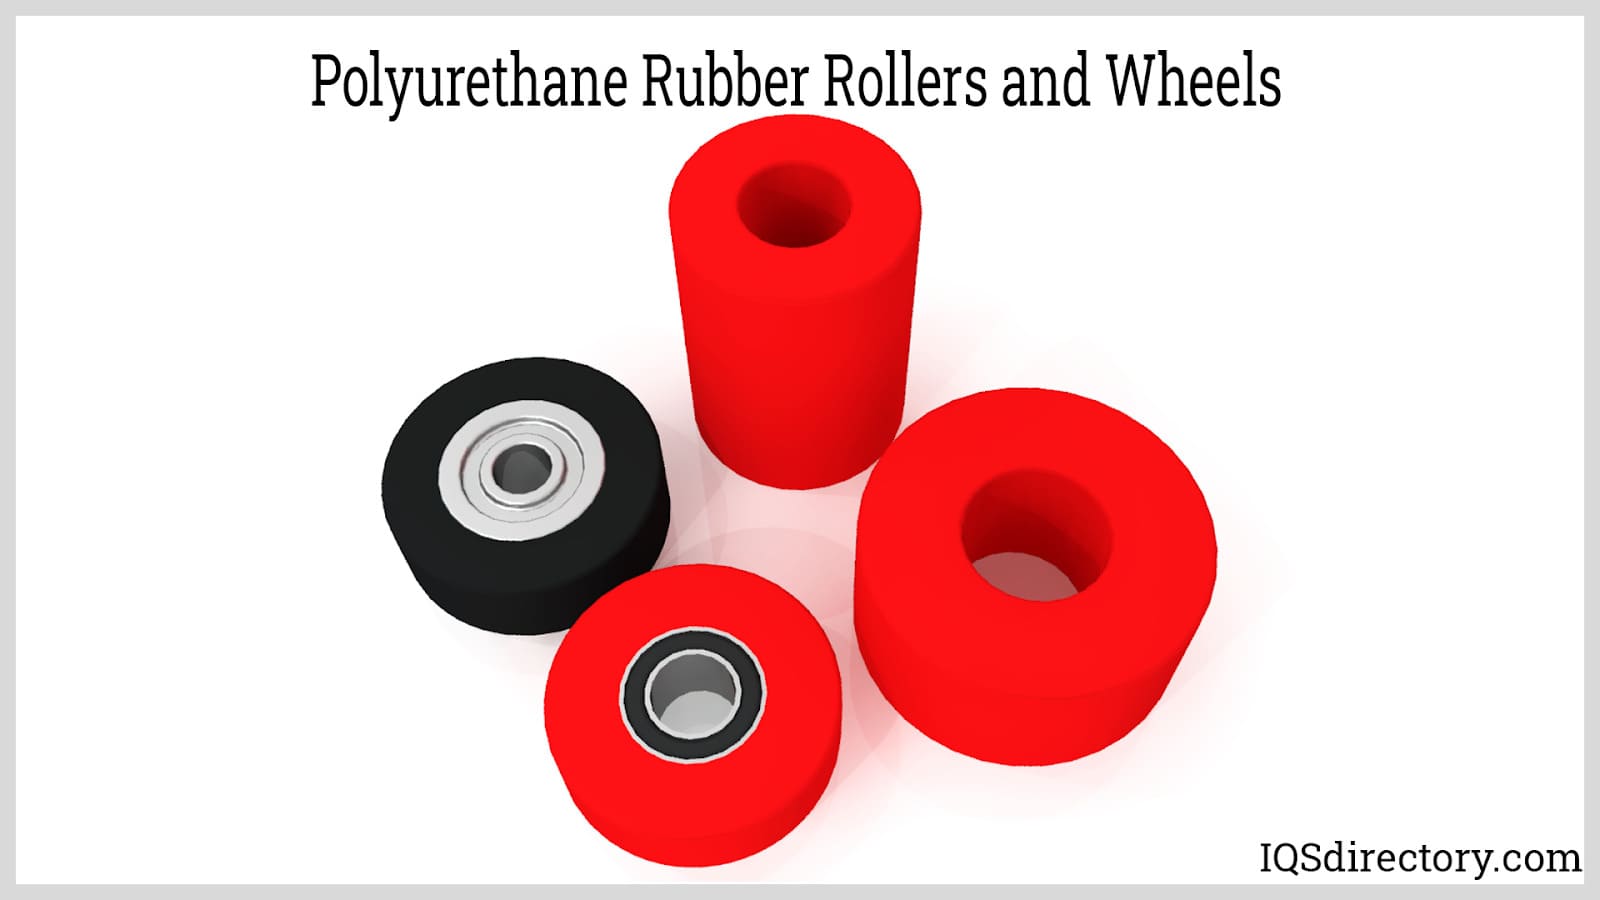 Rubber Roller: What Is It? How Is It Made? Types, Uses